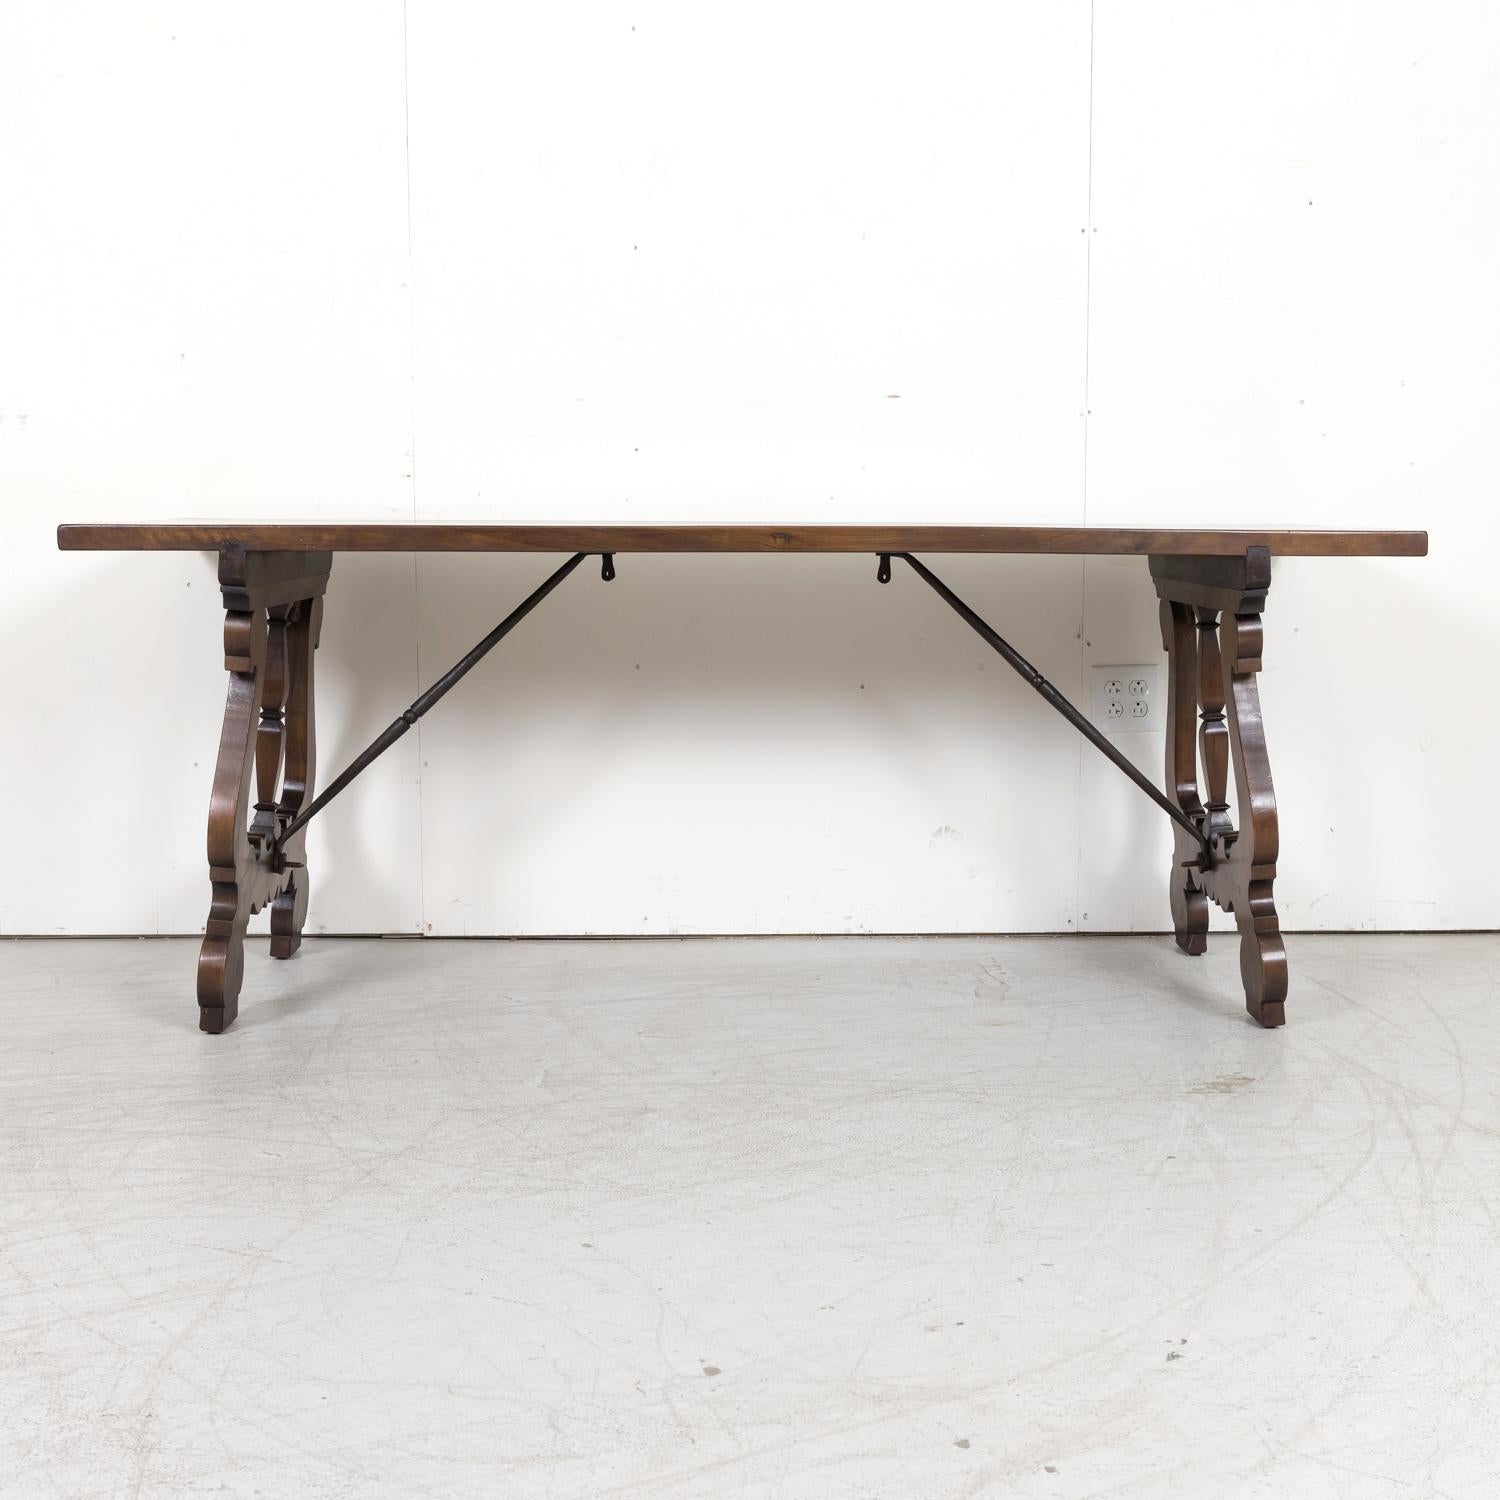 A 19th century Spanish Baroque style trestle dining table handcrafted of walnut near Barcelona, circa 1890s. Having a rectangular two-plank top resting on beautifully carved lyre legs joined together by hand forged iron stretchers, this handsome